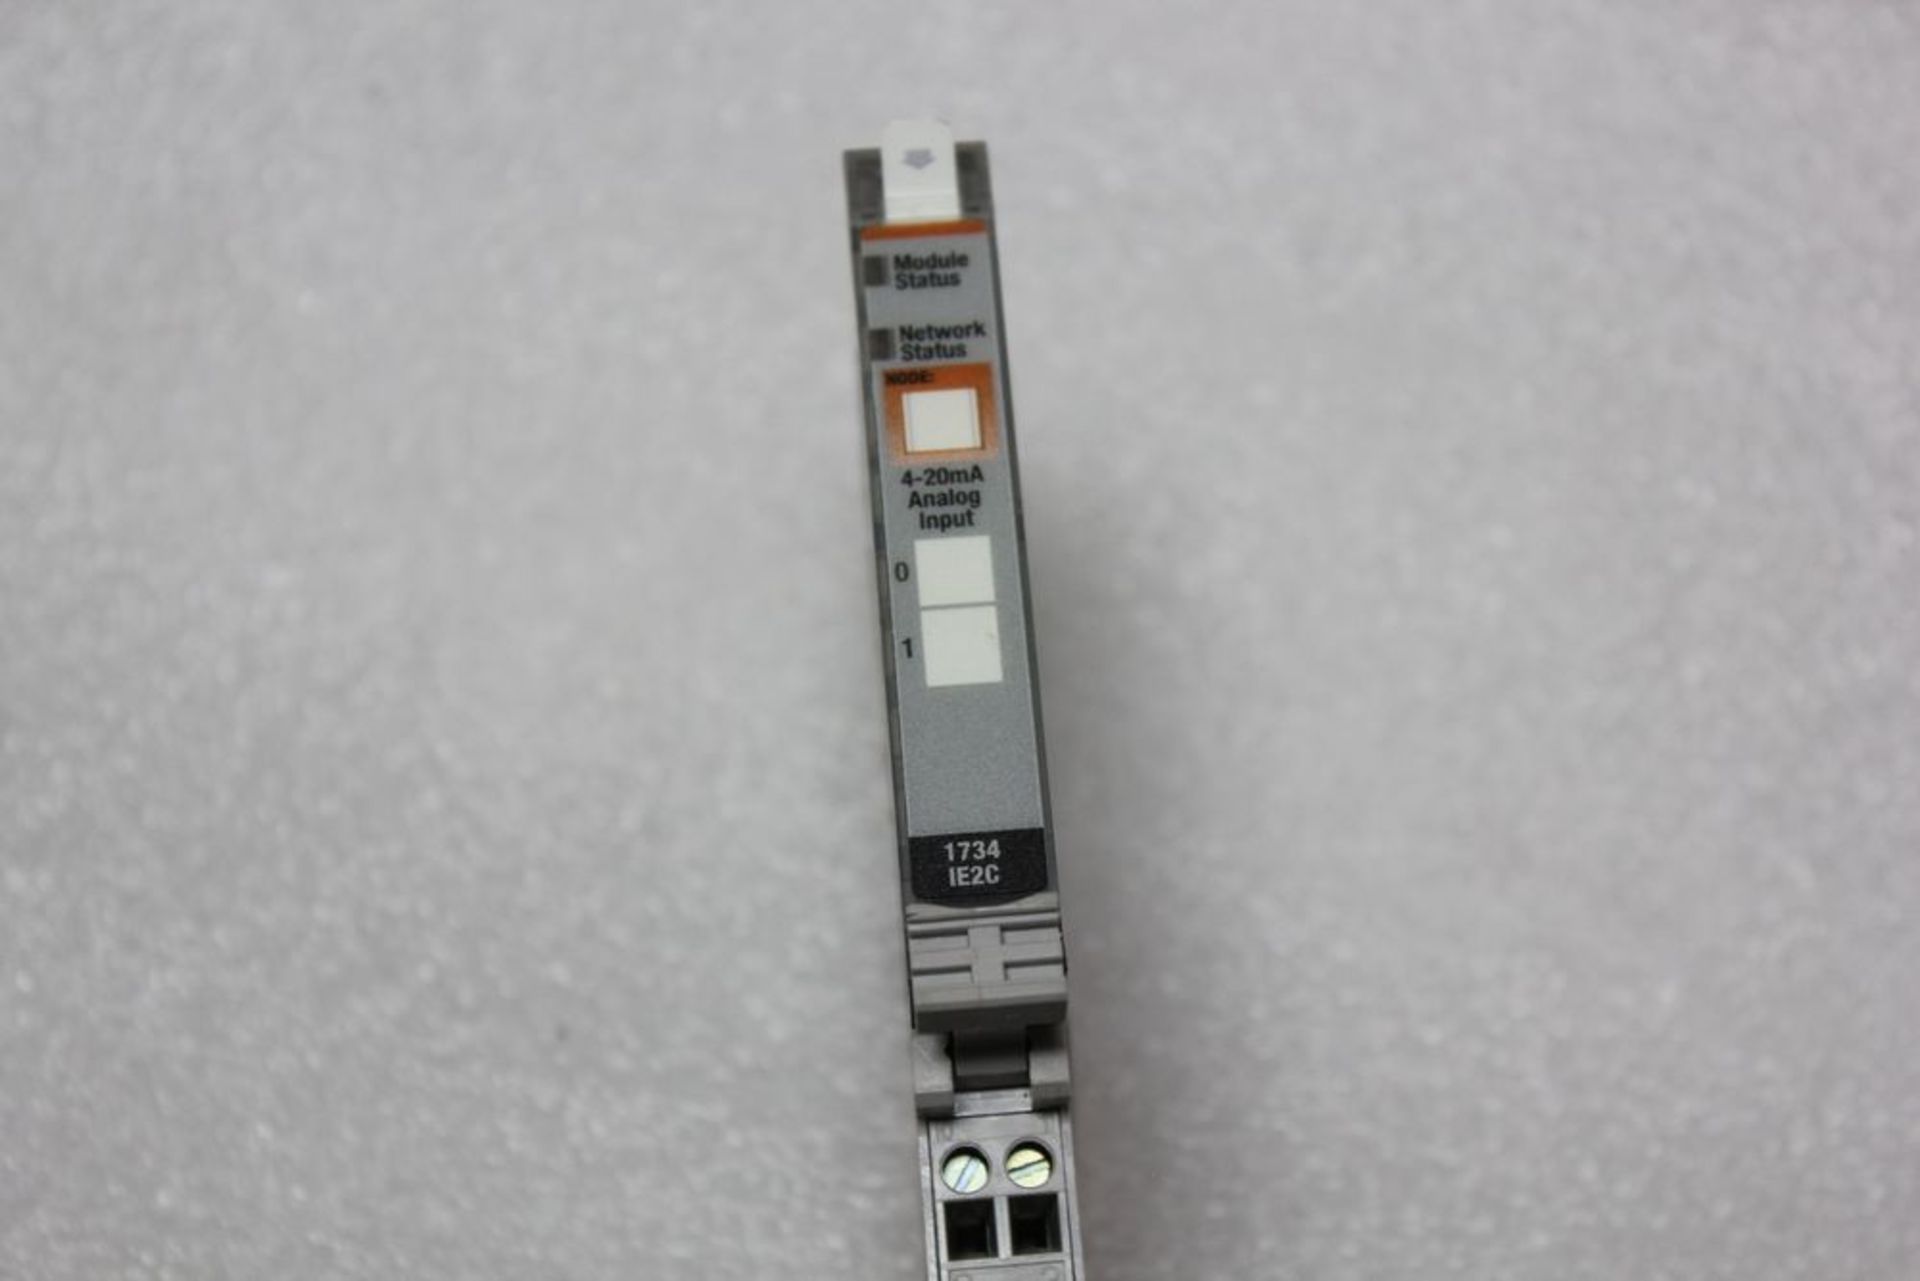 ALLEN BRADLEY POINT I/O MODULE WITH CARRIER - Image 2 of 4